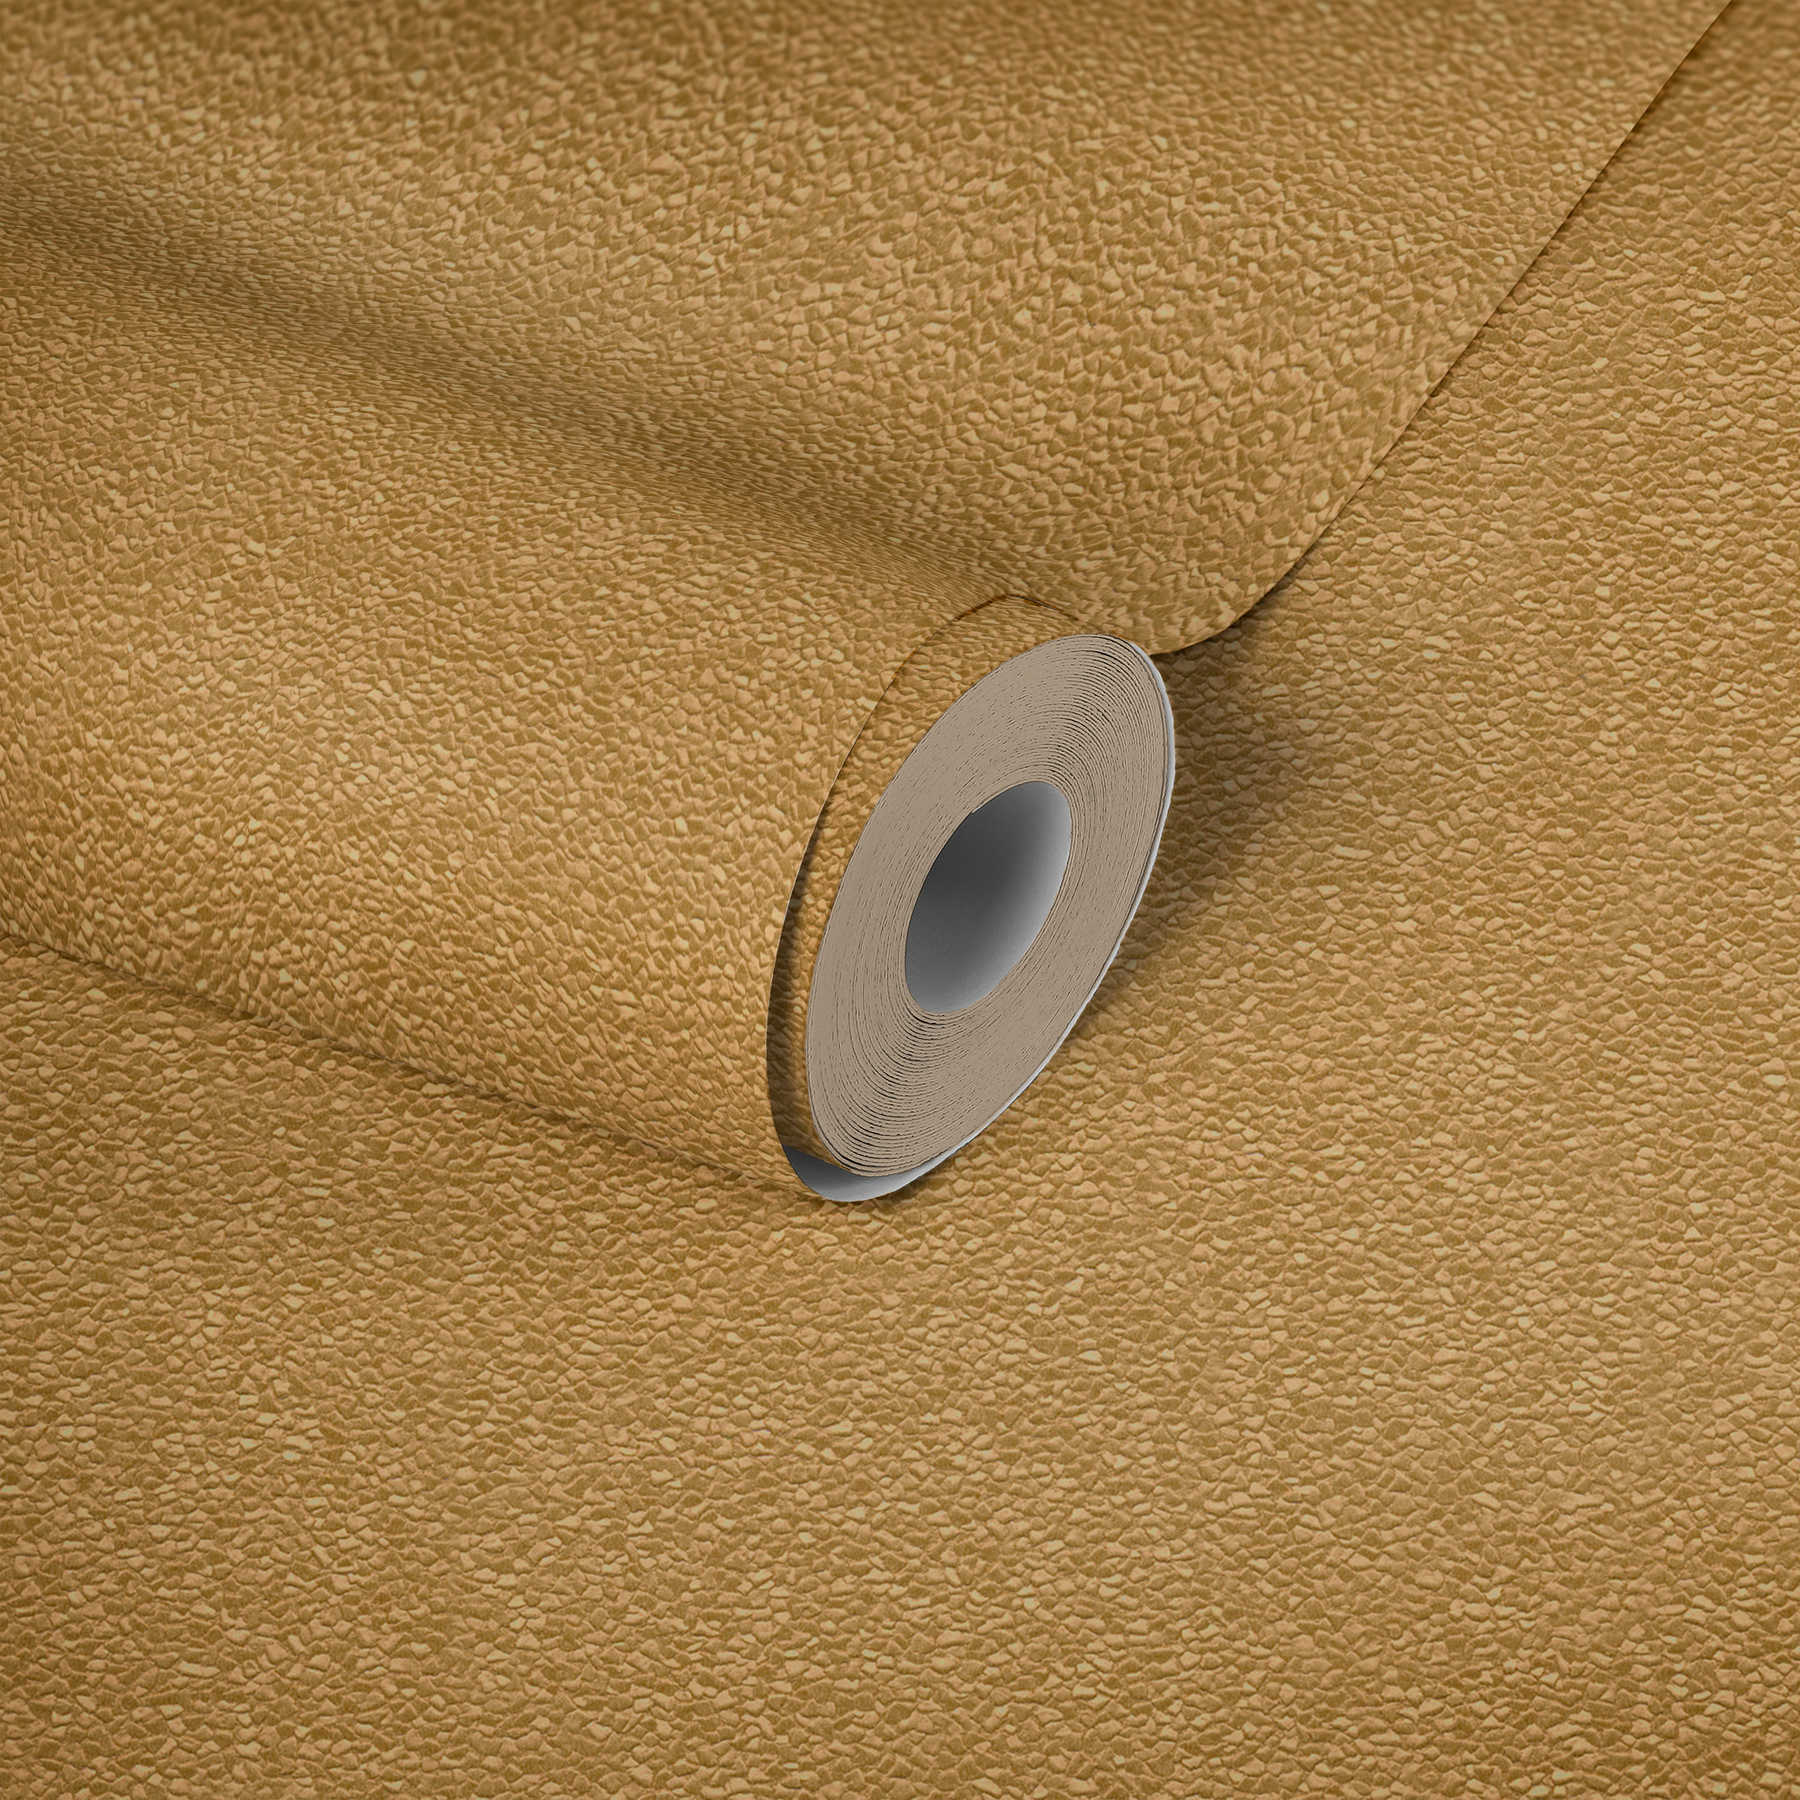             Golden wallpaper non-woven with nugget texture pattern
        